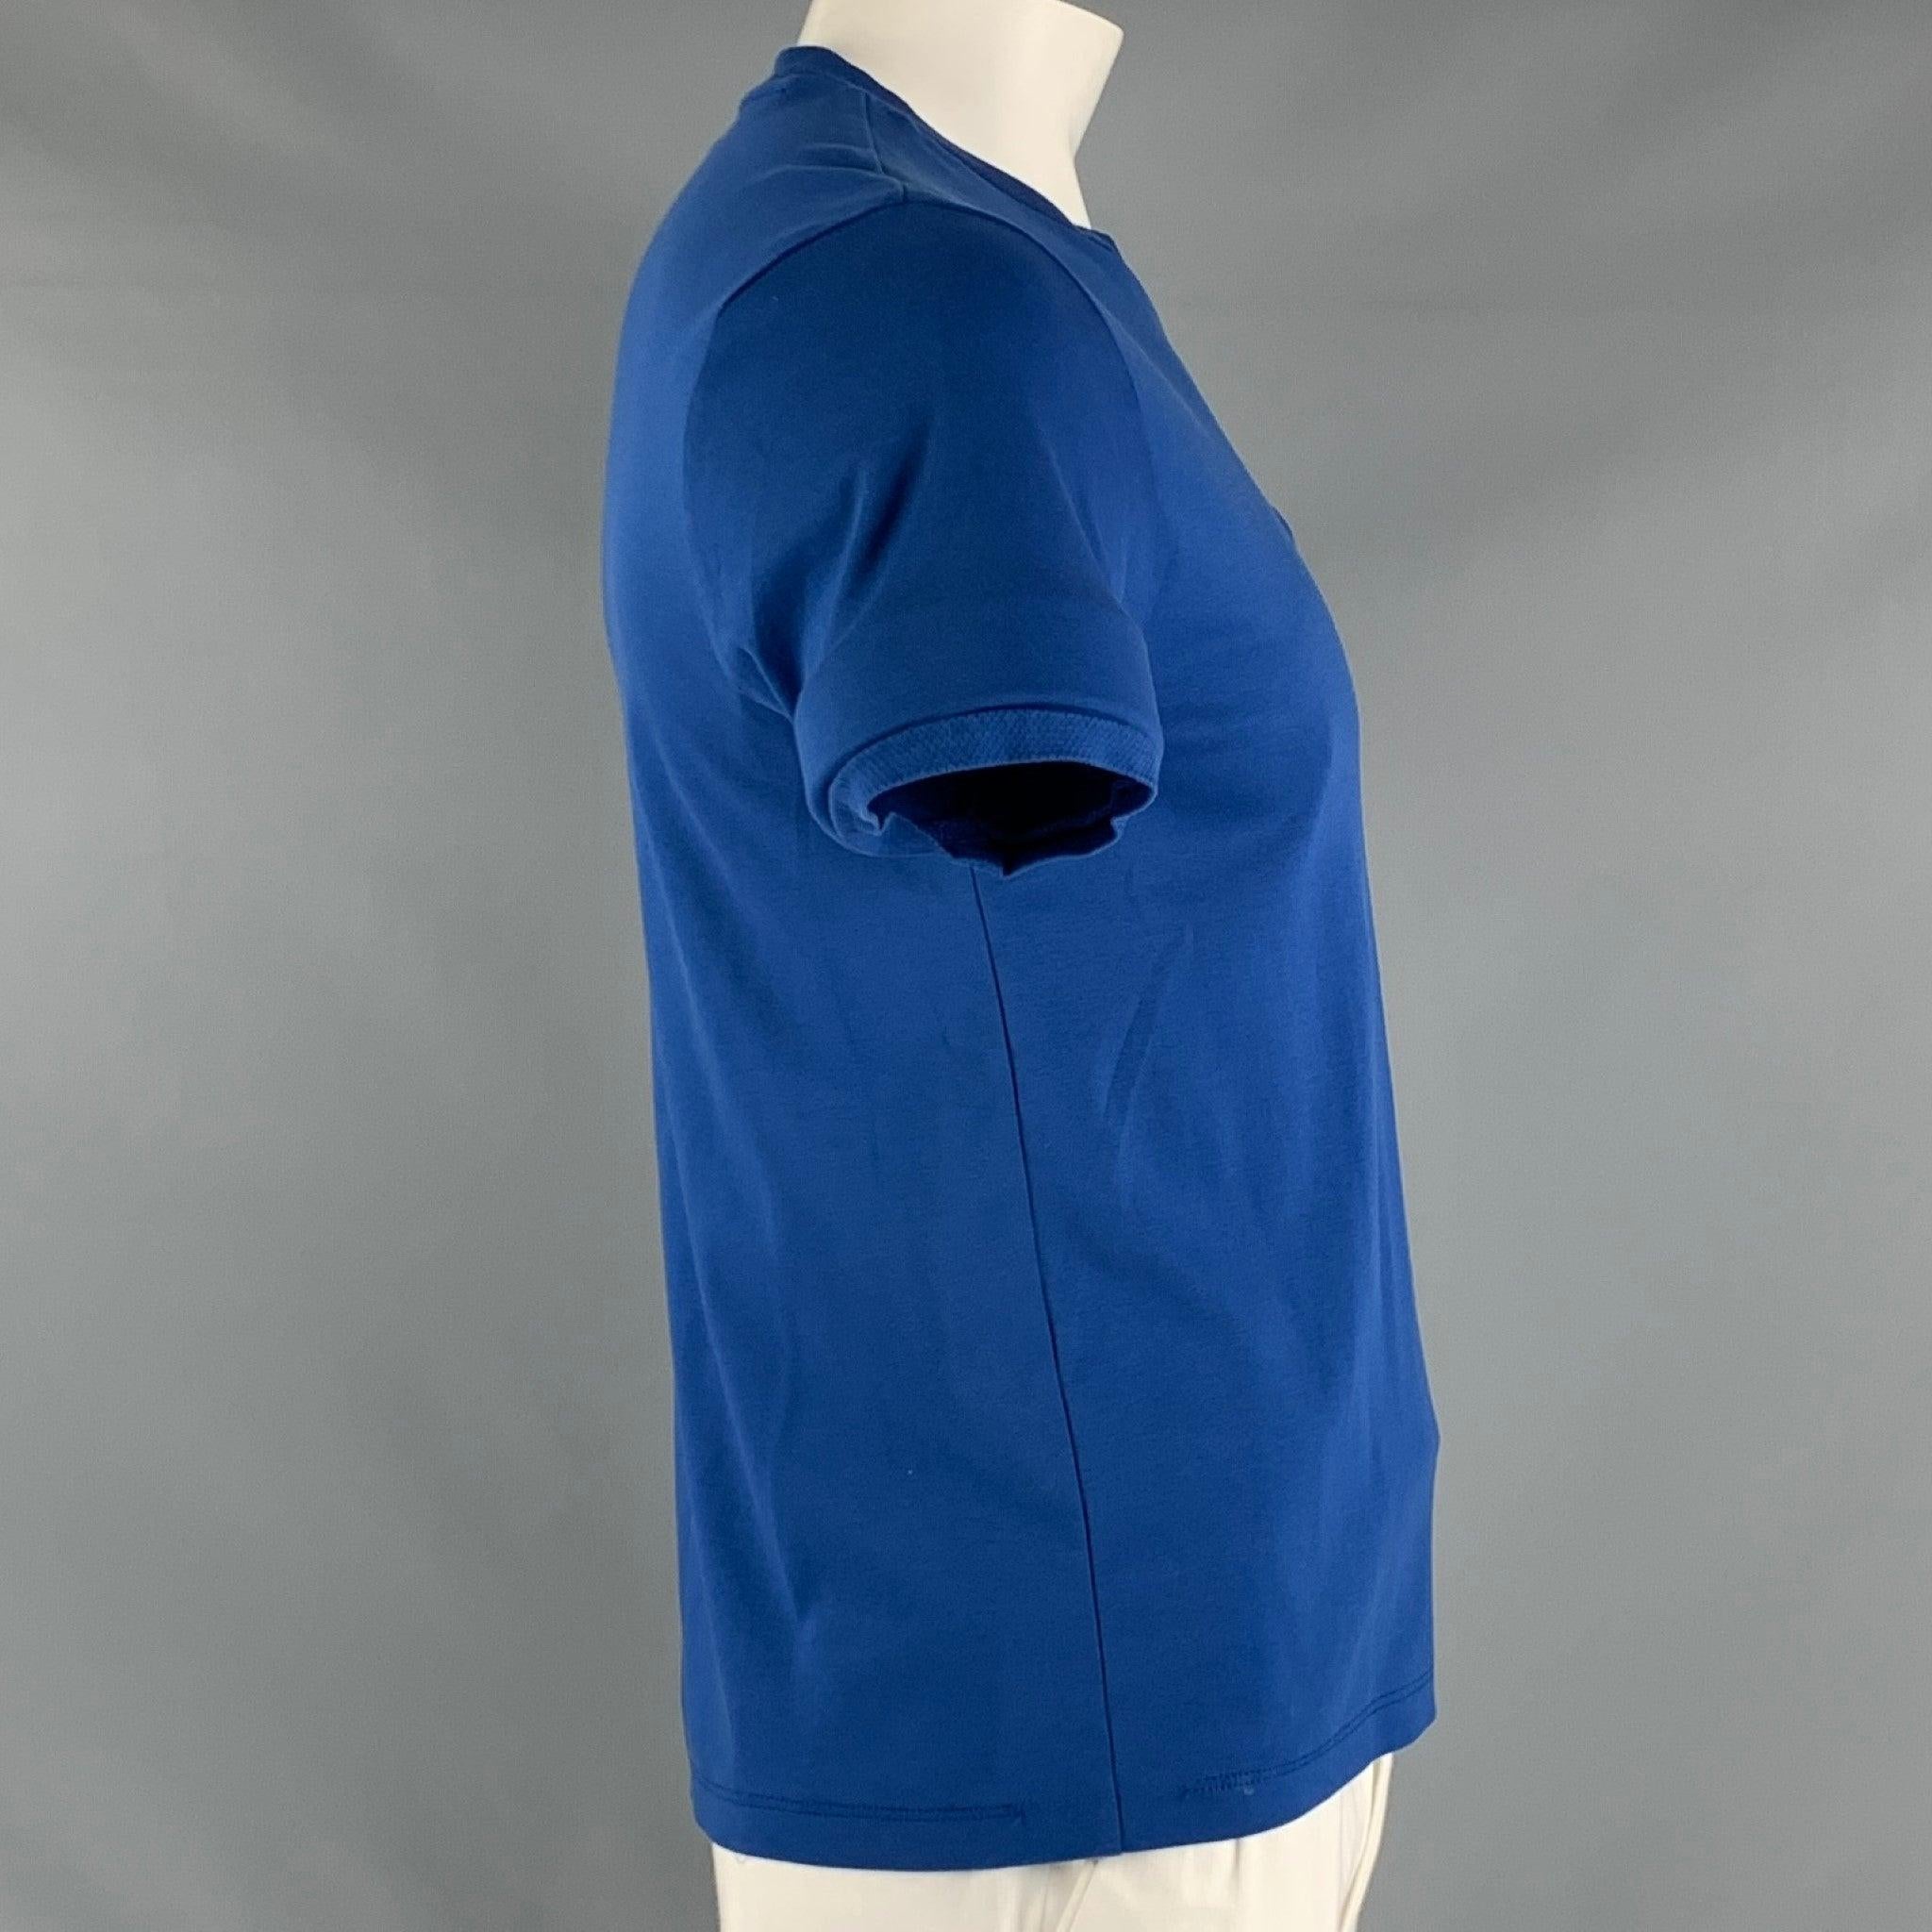 HUGO BOSS slim fit T-Shirt comes in blue cotton jersey fabric with a crew-neck, and a front pocket.Good Pre-Owned Condition. Moderate signs of wear and broken stitches. 

Marked:   L 

Measurements: 
 
Shoulder: 17.5 inches Chest: 44 inches Sleeve: